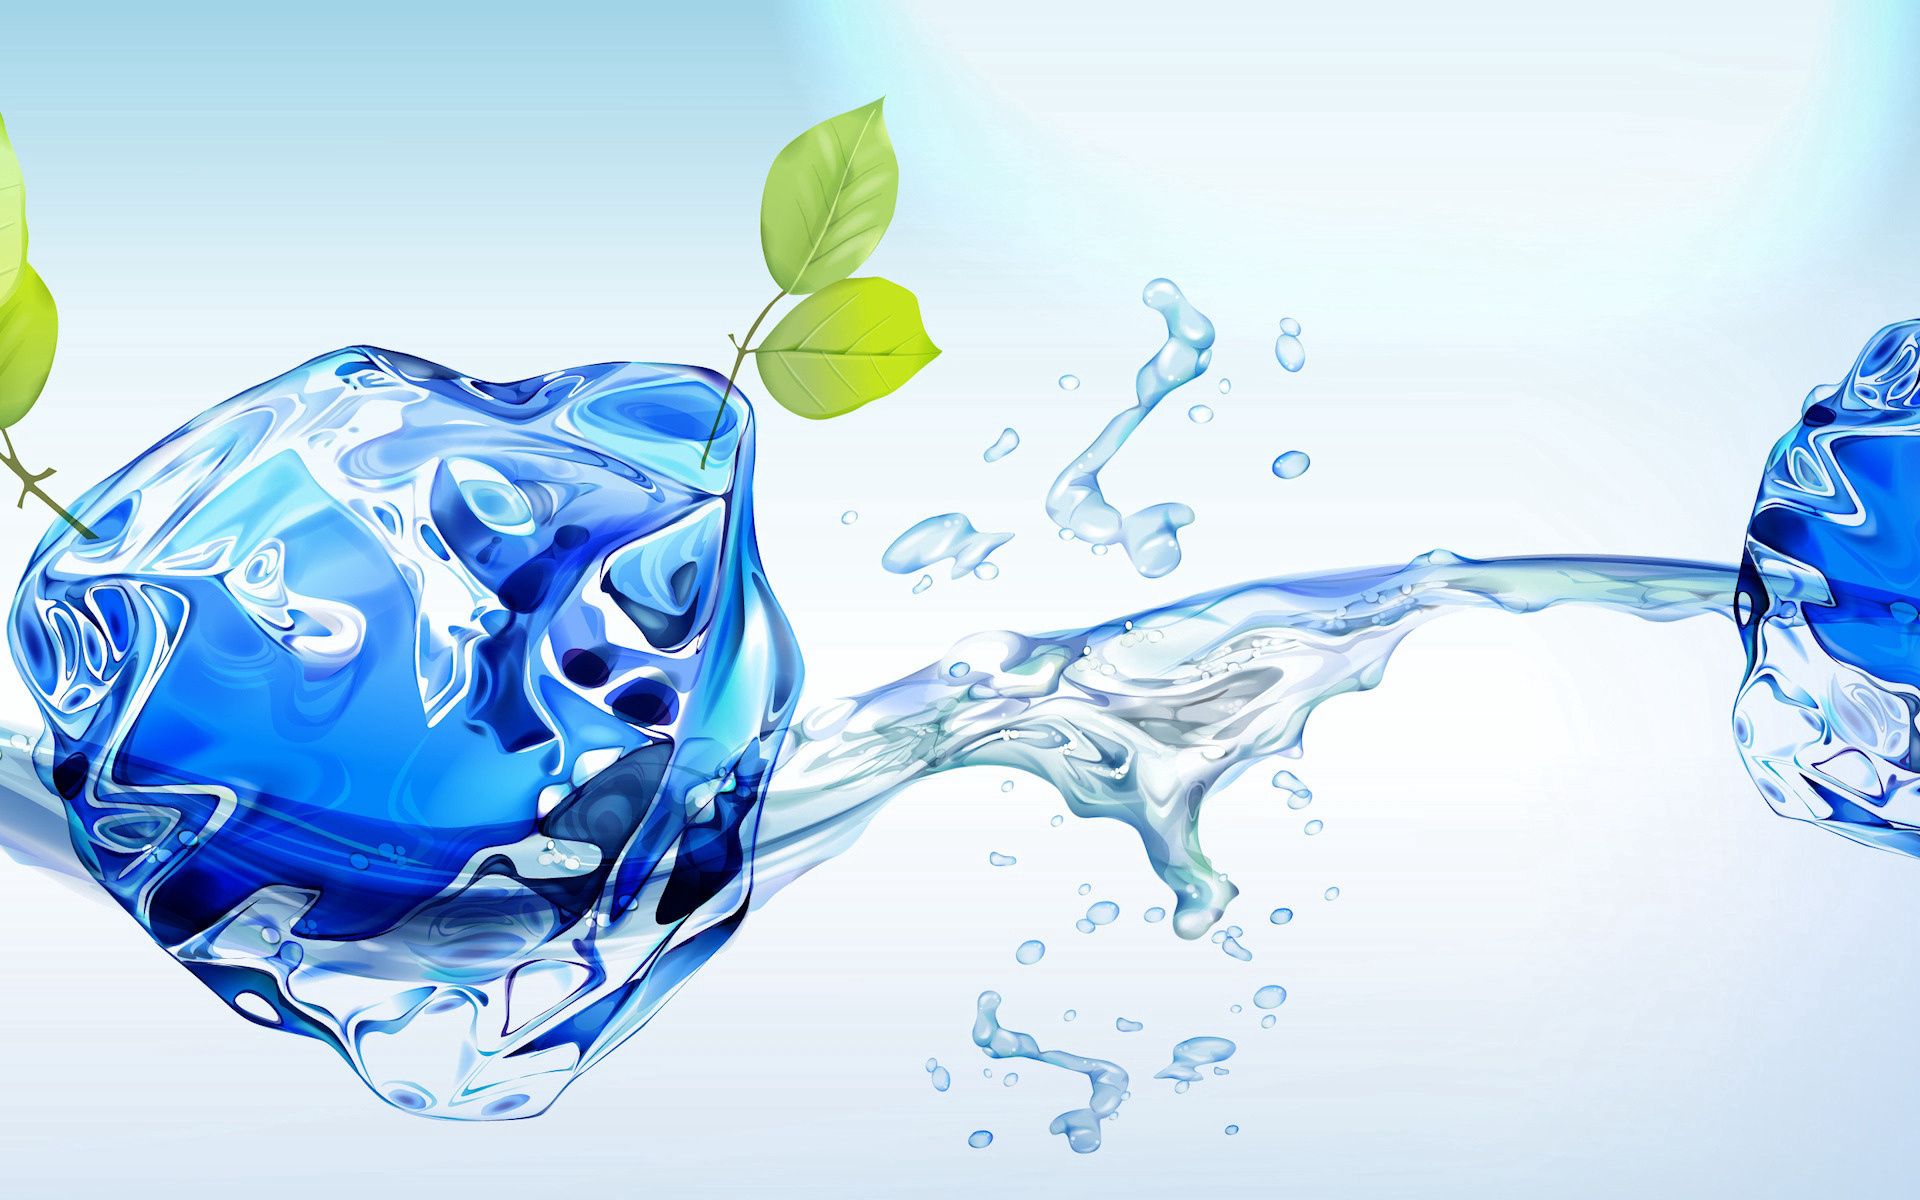 splash, spray, sprout, ball, water, abstract Full HD